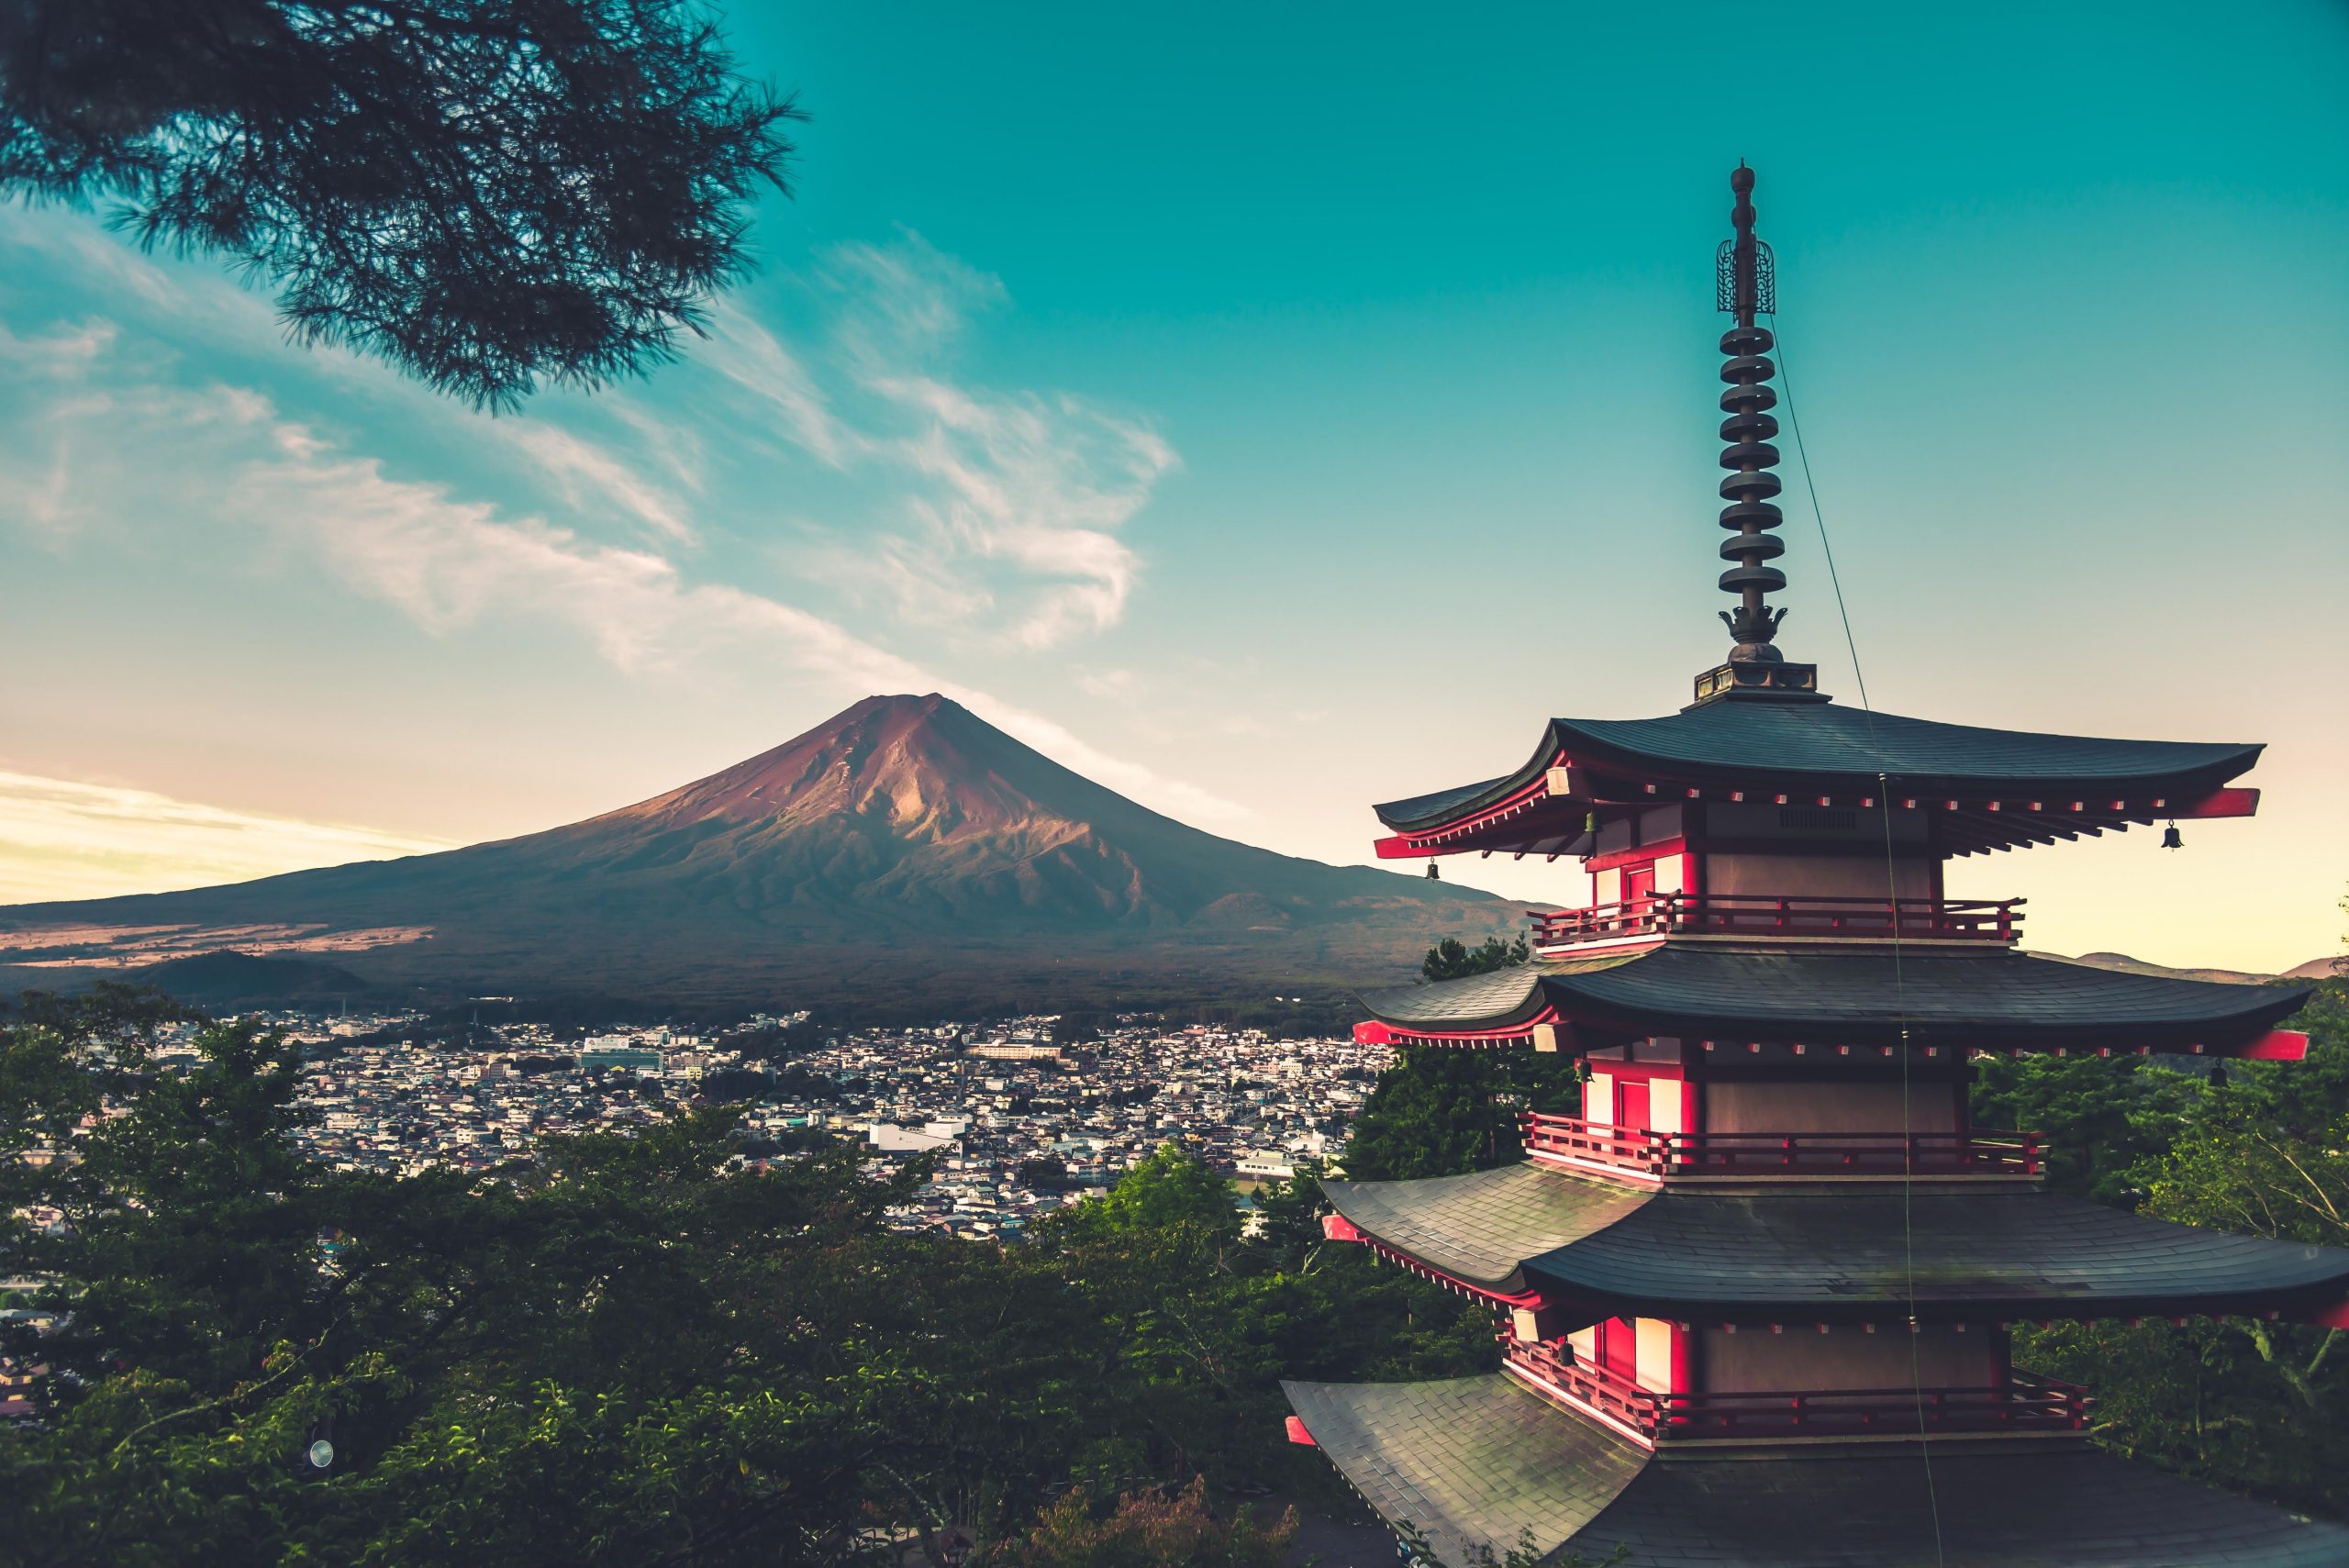 What are some good day trips from Tokyo?